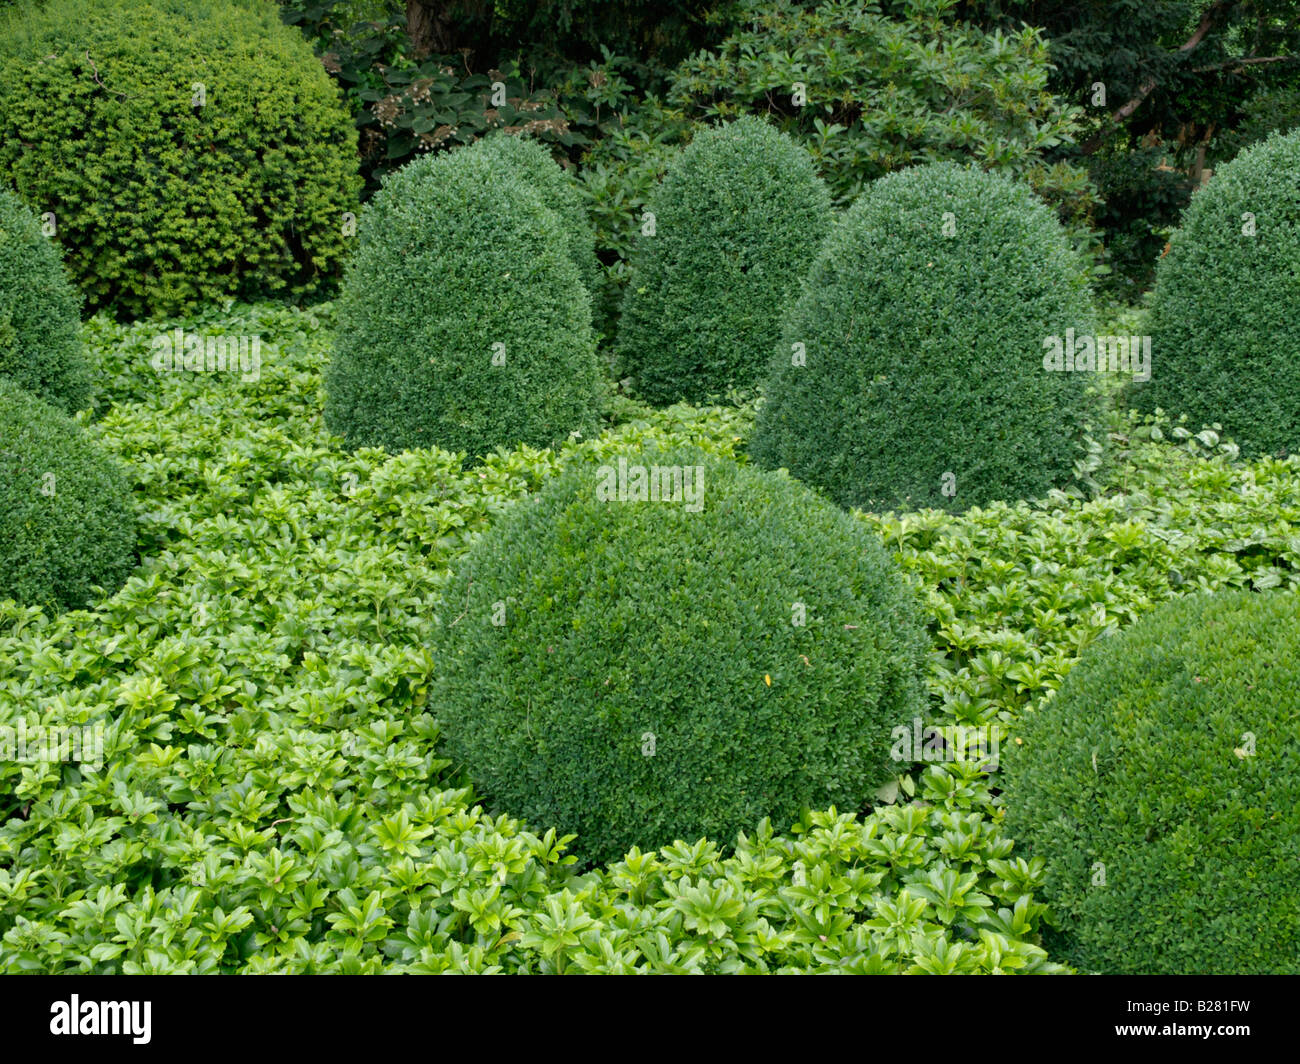 Common boxwood (Buxus sempervirens) and Japanese spurge (Pachysandra terminalis) Stock Photo